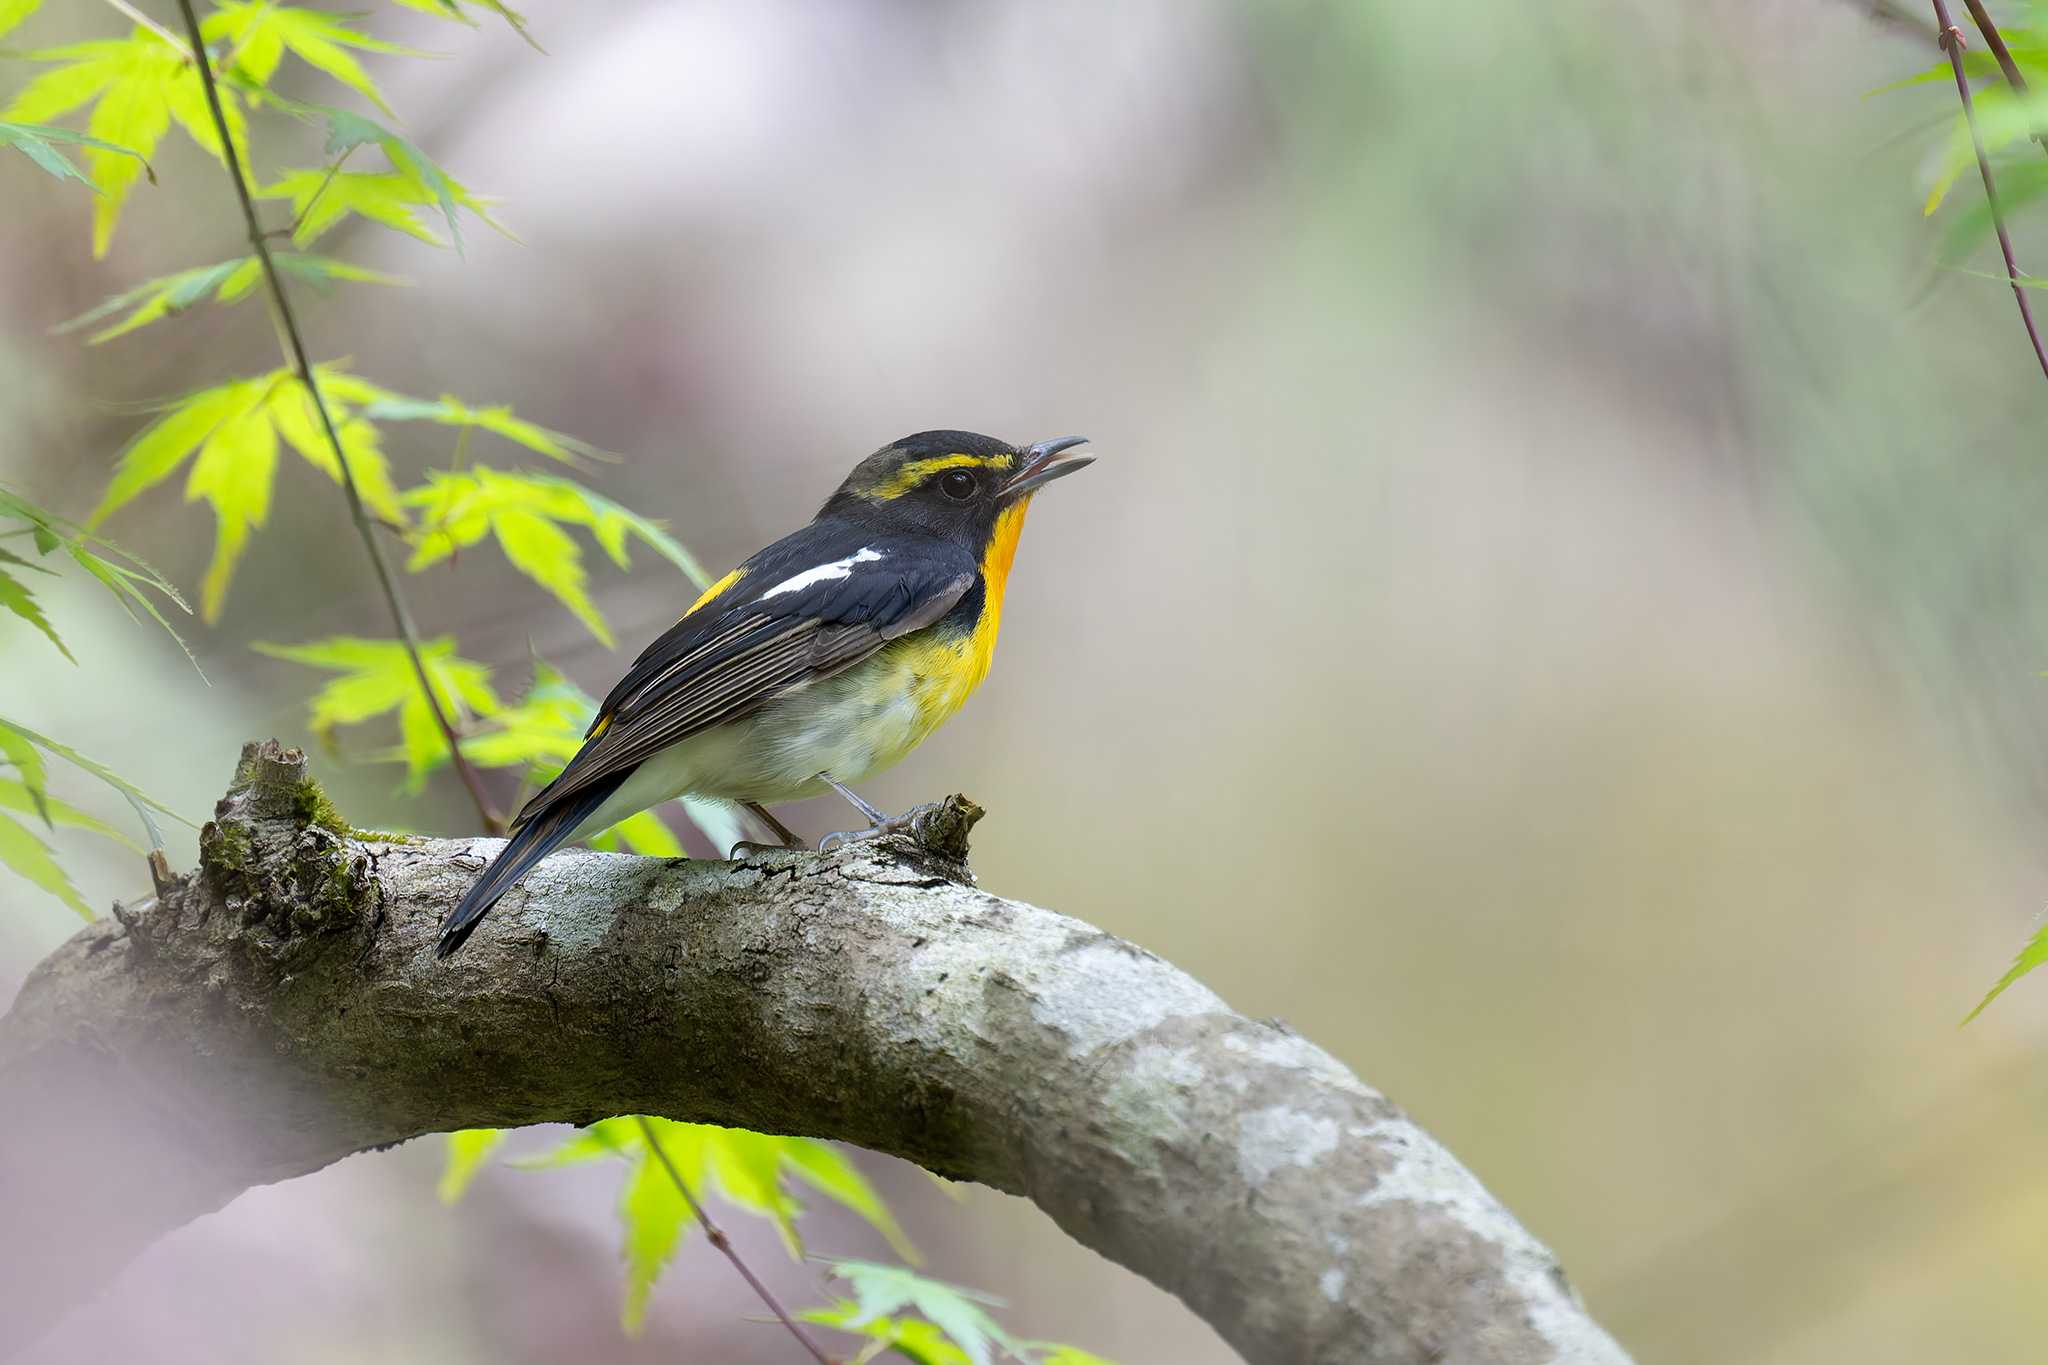 Photo of Narcissus Flycatcher at Hayatogawa Forest Road by たい焼きの煮付け